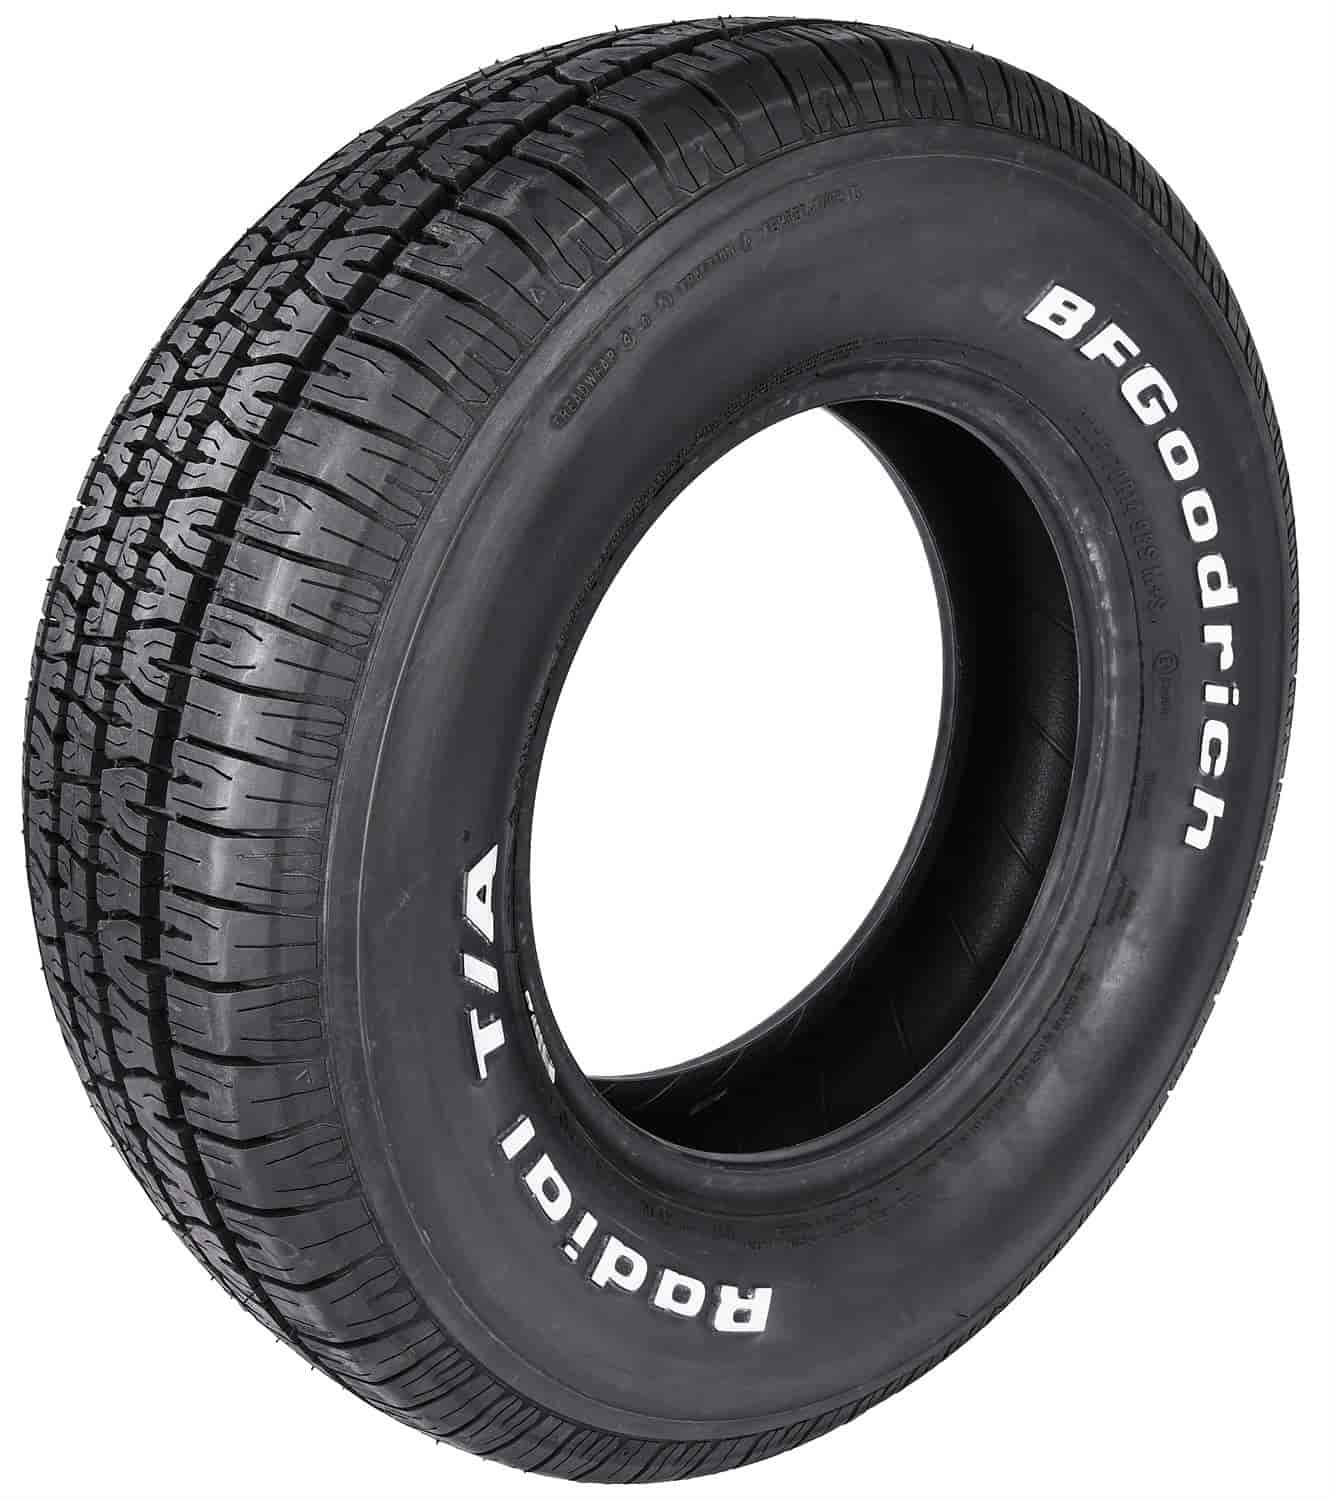 RADIAL T/A P225/70R14